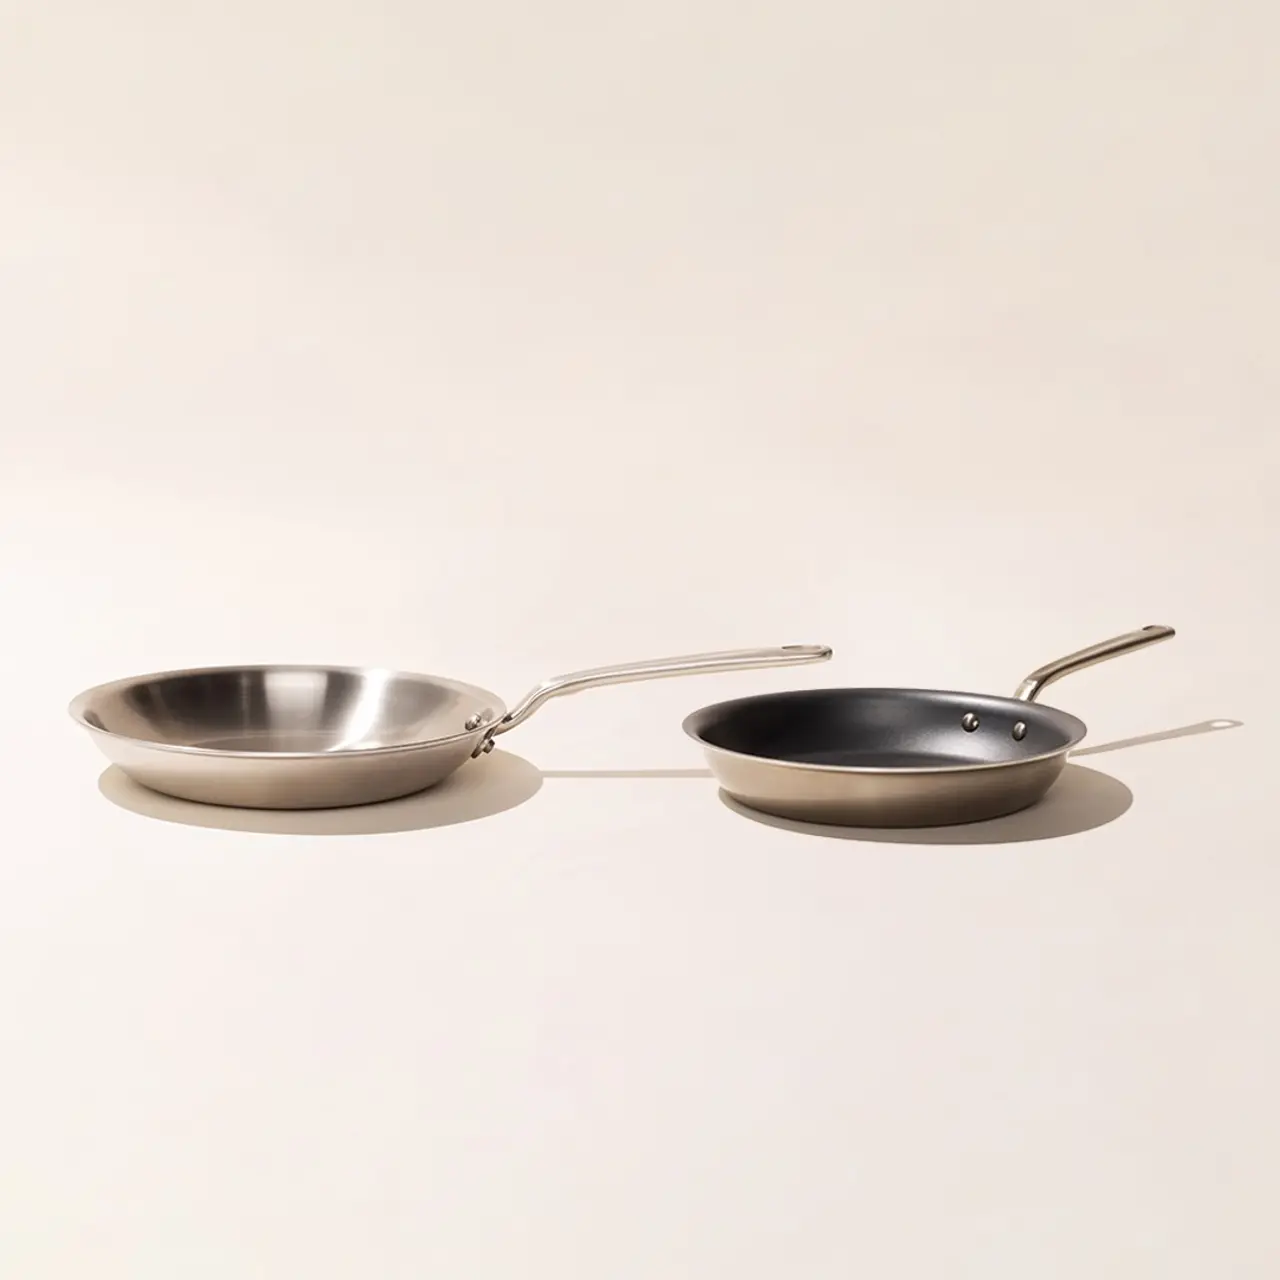 Two frying pans, one stainless steel and one with a non-stick surface, are placed side by side against a neutral background.